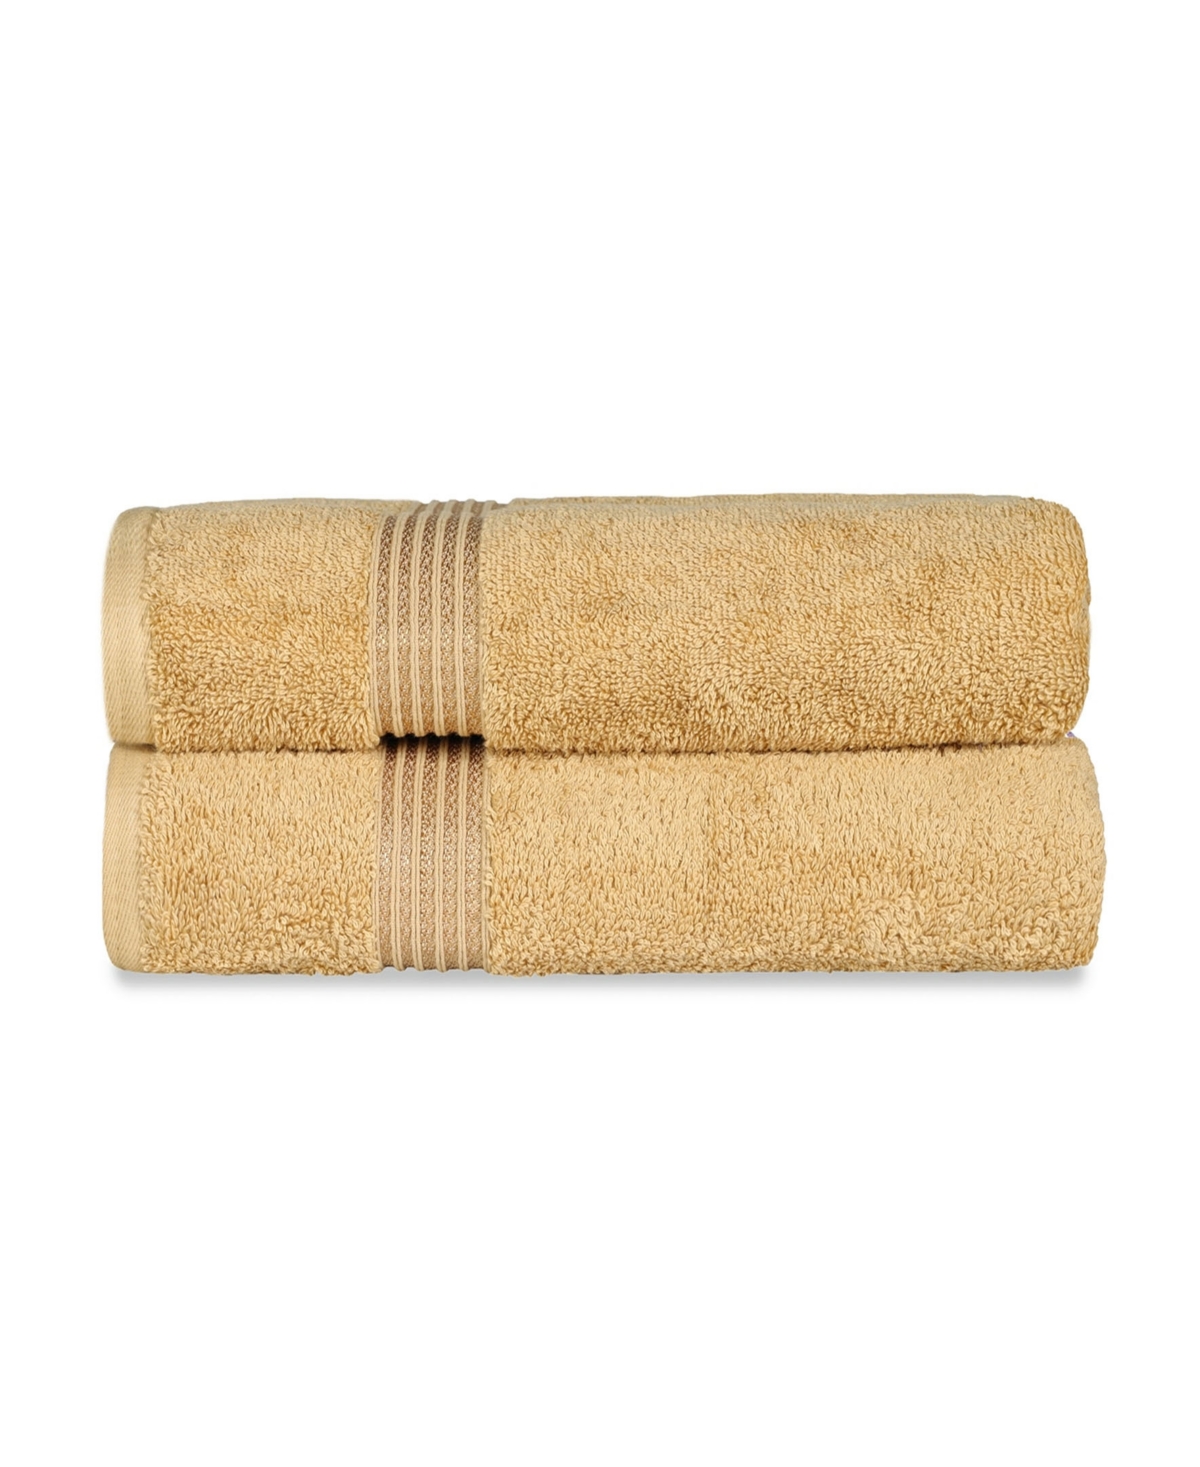 Superior Solid Quick Drying Absorbent 2 Piece Egyptian Cotton Bath Sheet Towel Set Bedding In Gold